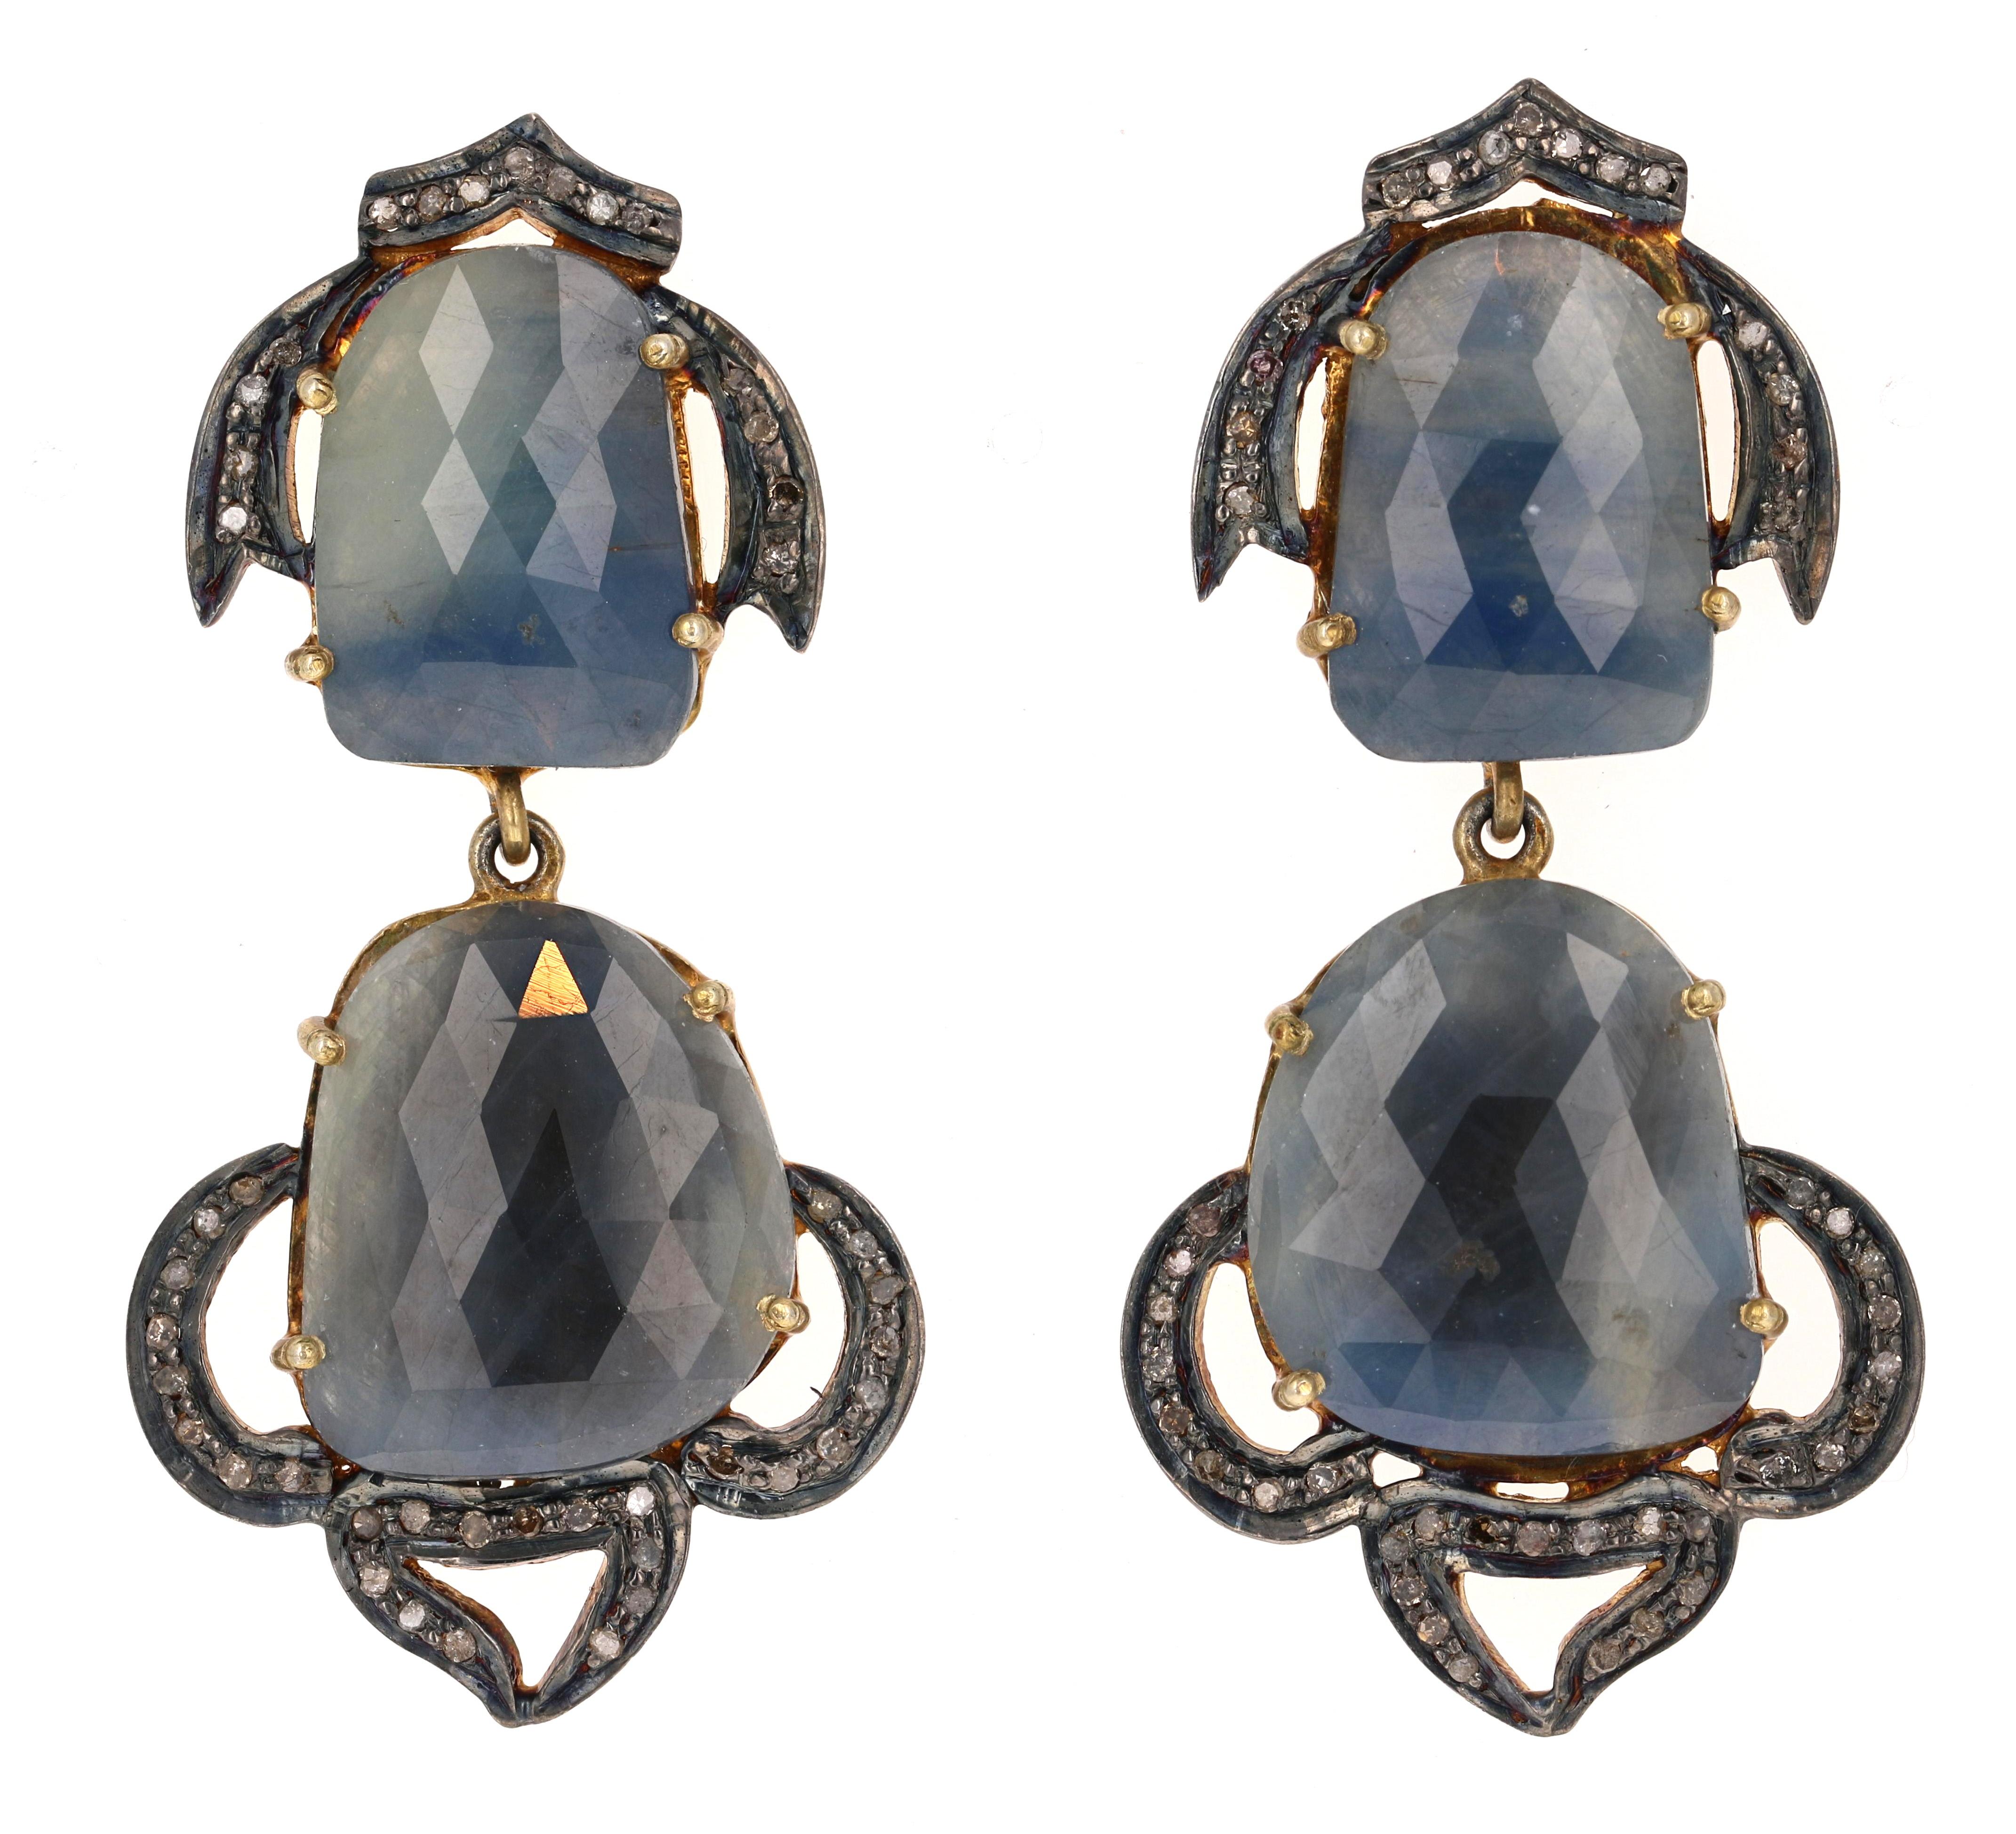 925 Sterling Silver, Gold Plated Earrings
Gorgeous  Sapphire Slice Chandelier Earrings
Vintage Finish
Standard Post & Push-back backing 